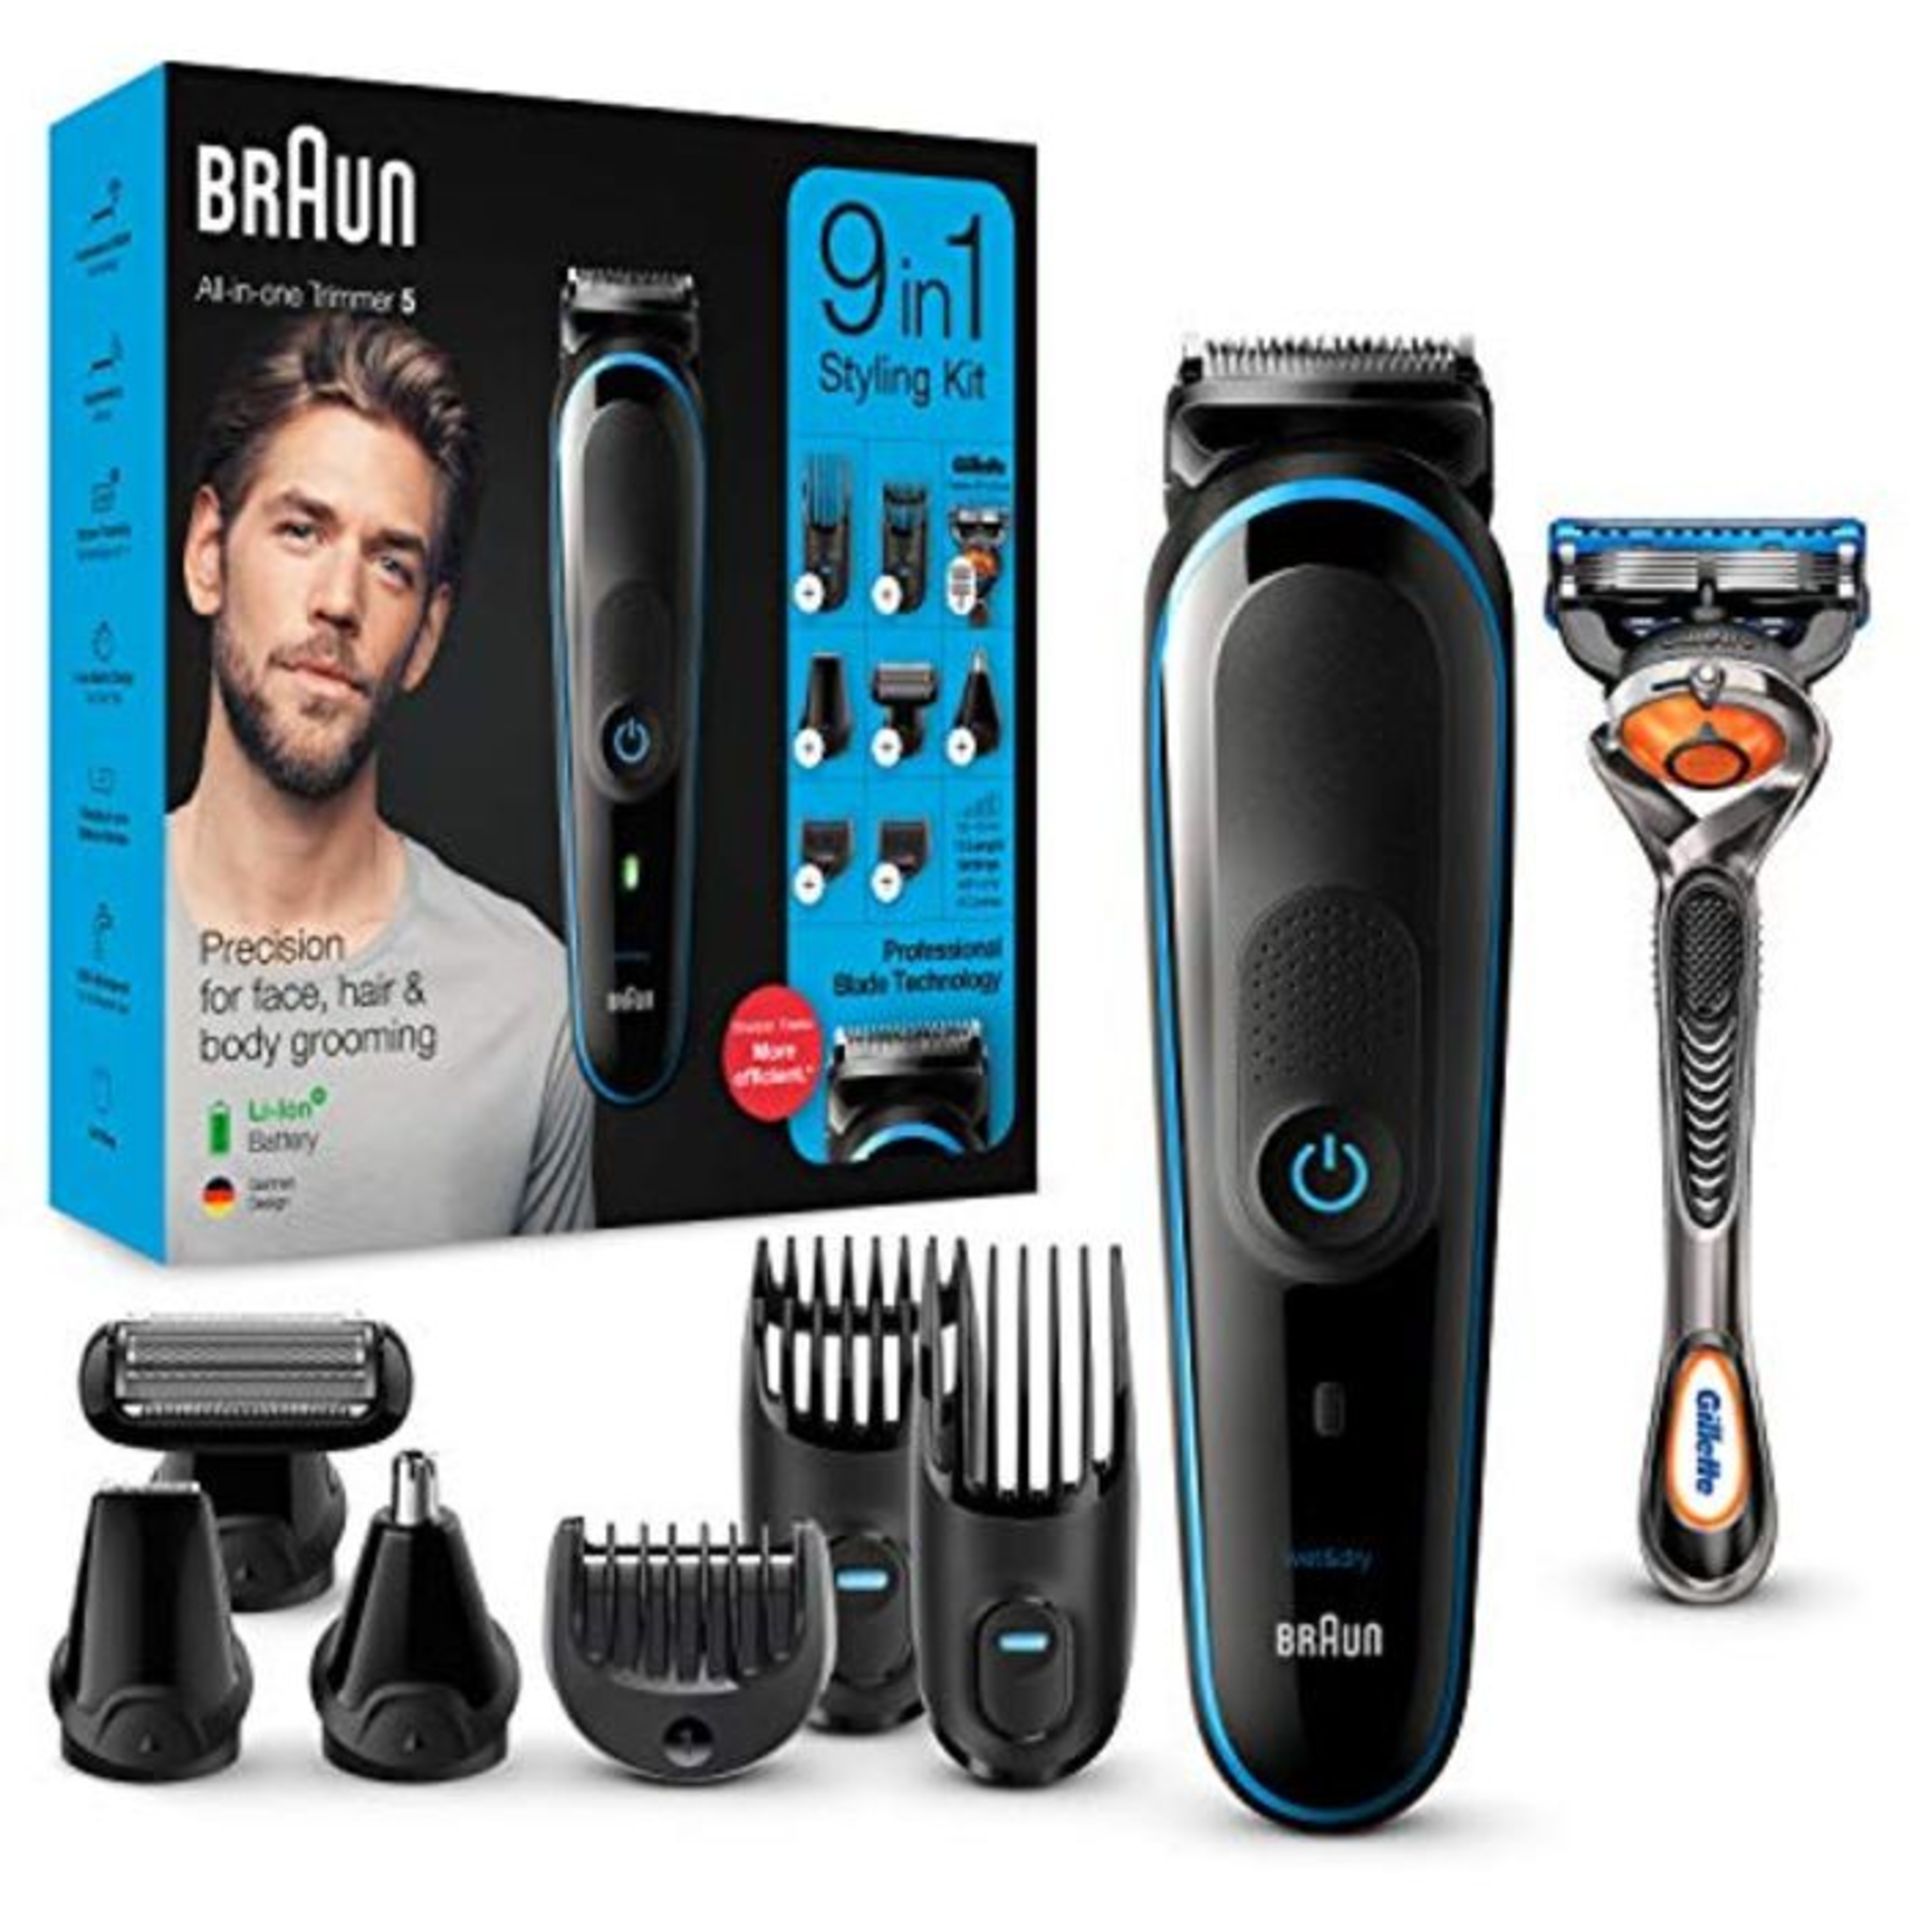 Braun 9-in-1 All-in-one Trimmer 5 MGK5280, Beard Trimmer for Men, Hair Clipper and Bod